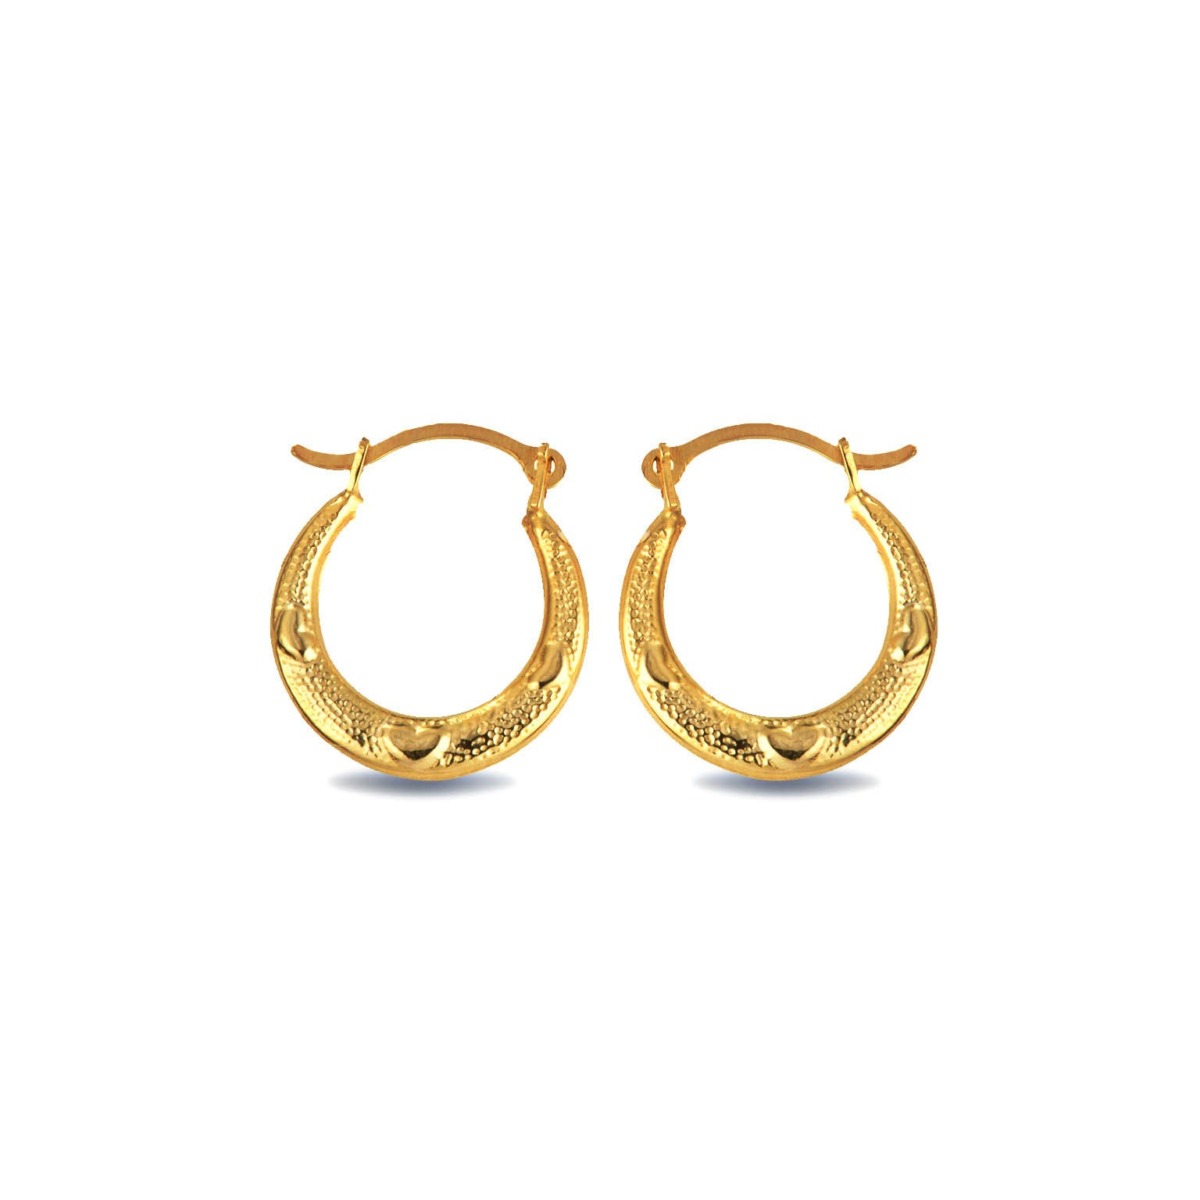 Earrings in Gold at Gold Boutique GOOFASH